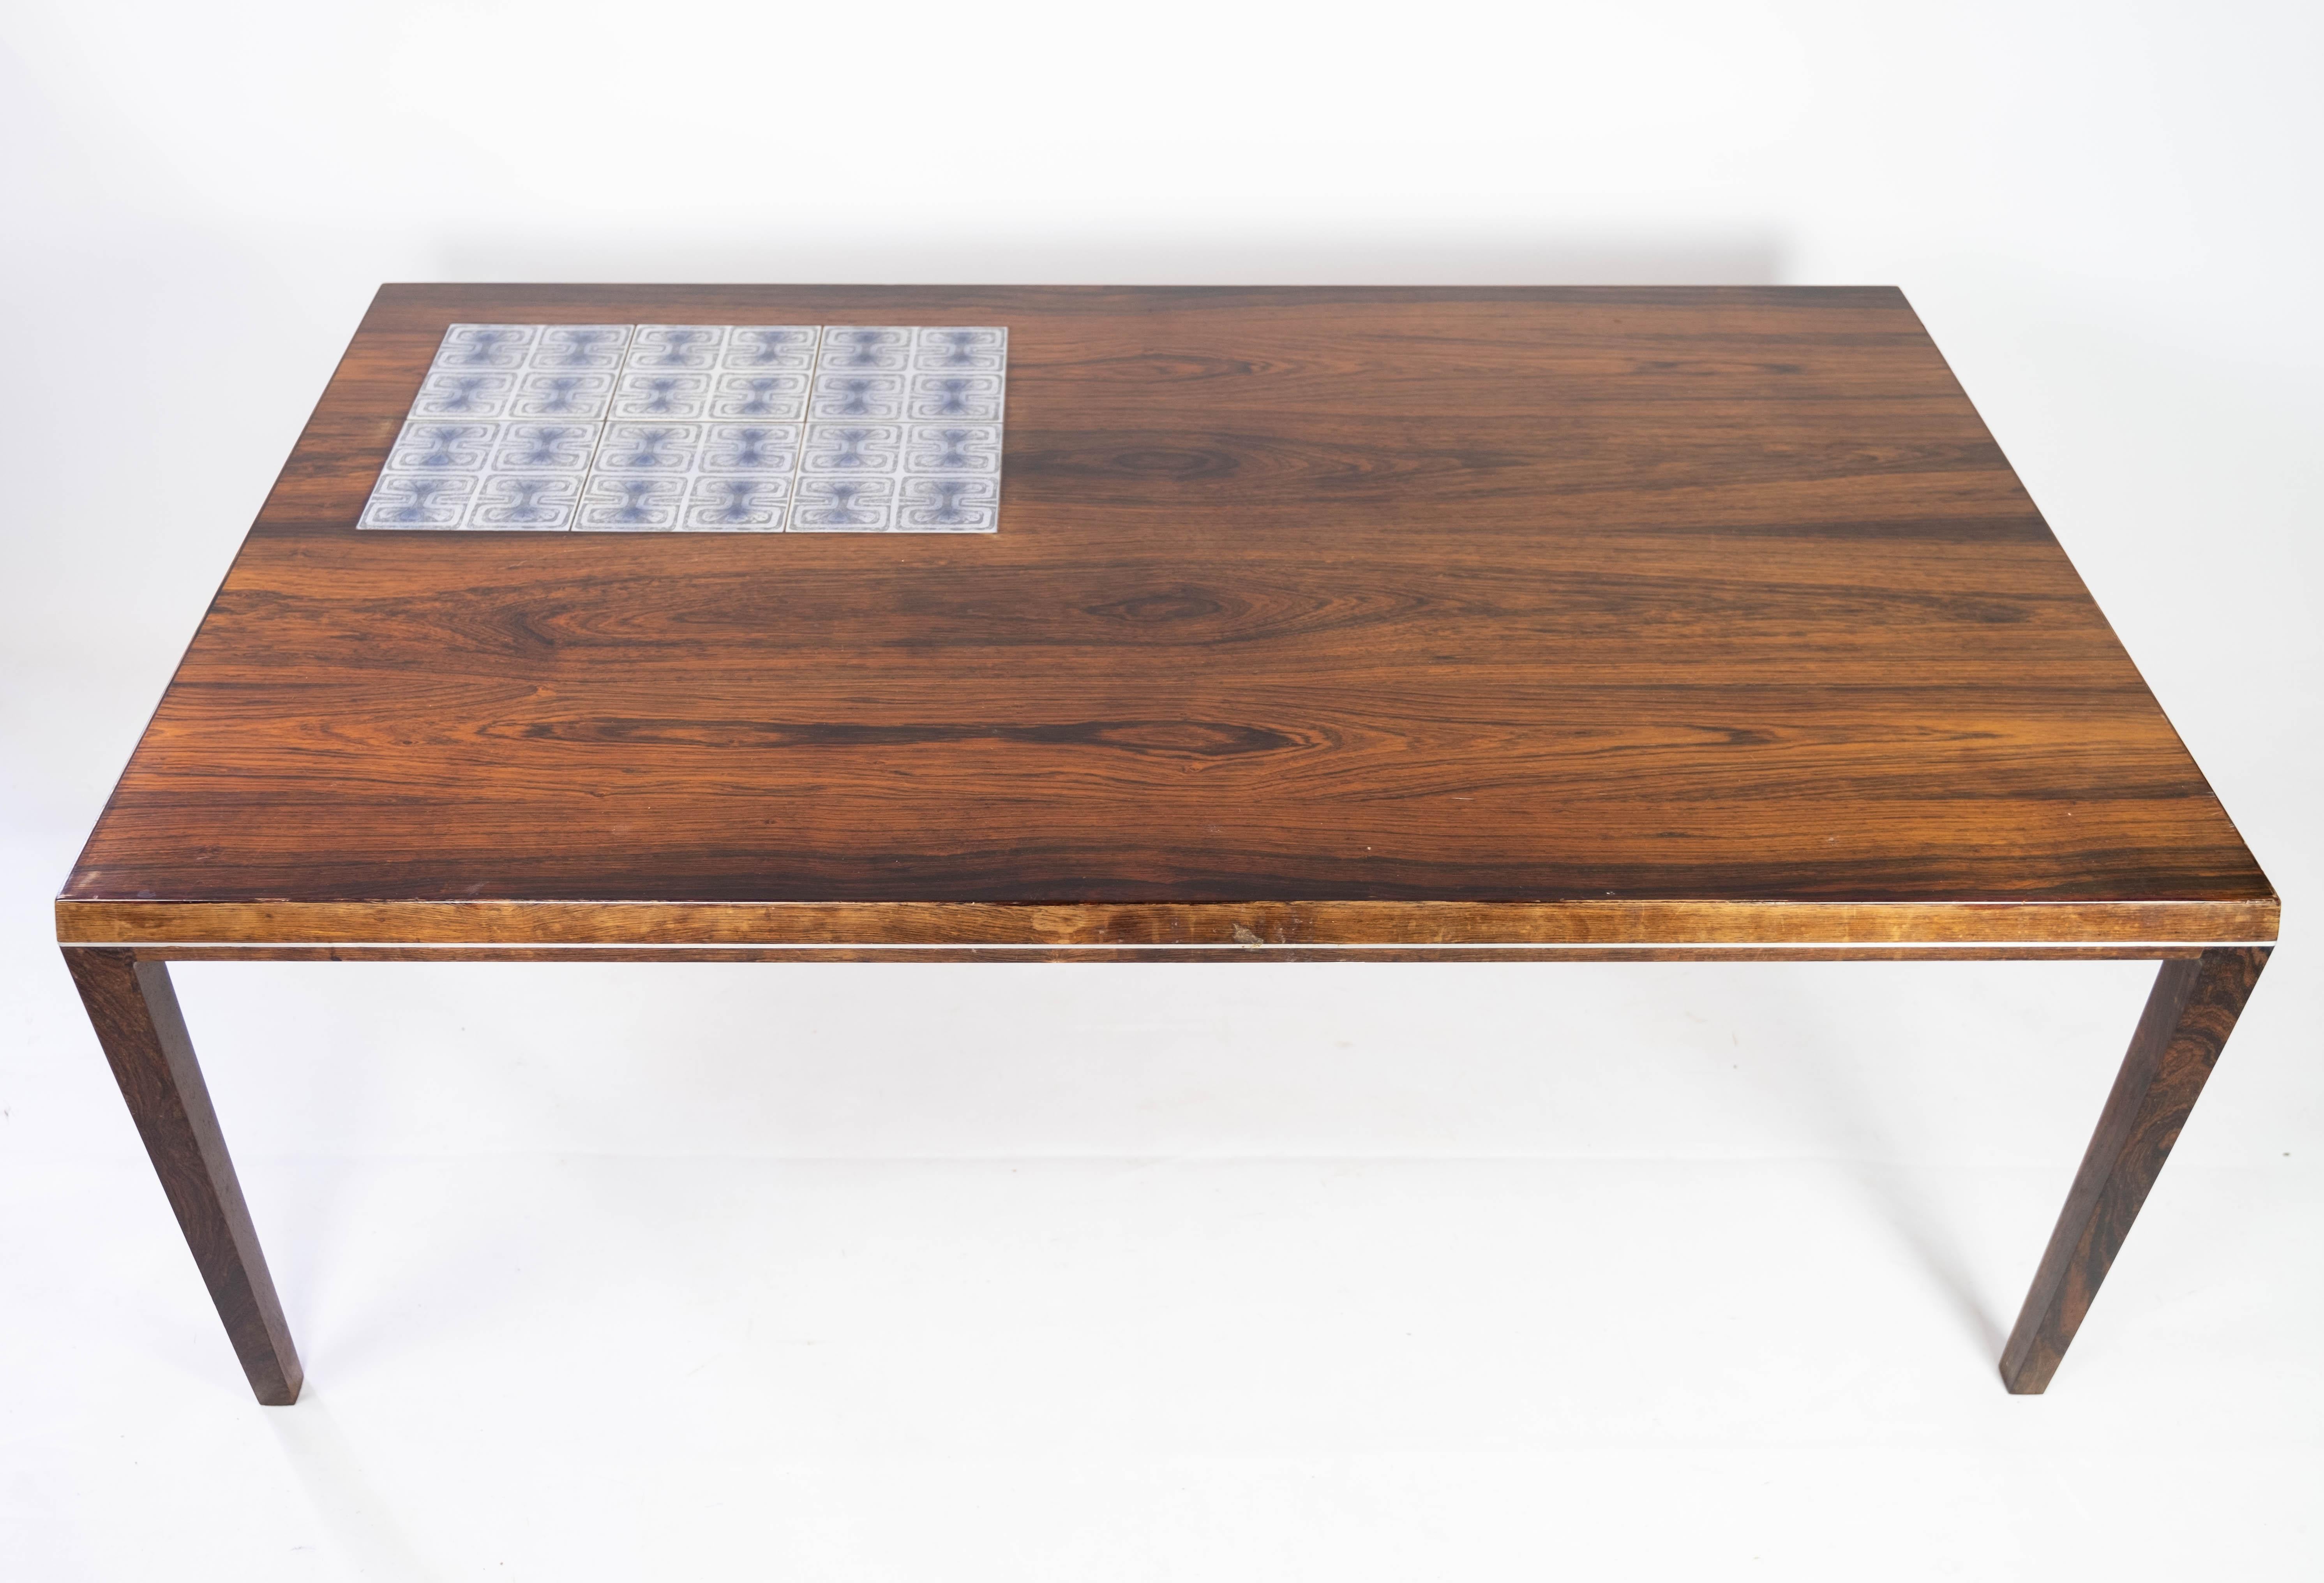 
This coffee table, a hallmark of Danish design from the 1960s, blends the timeless elegance of rosewood with the rustic charm of tiles. Designed by Johannes Andersen and crafted by Silkeborg Furniture, it represents the epitome of mid-century